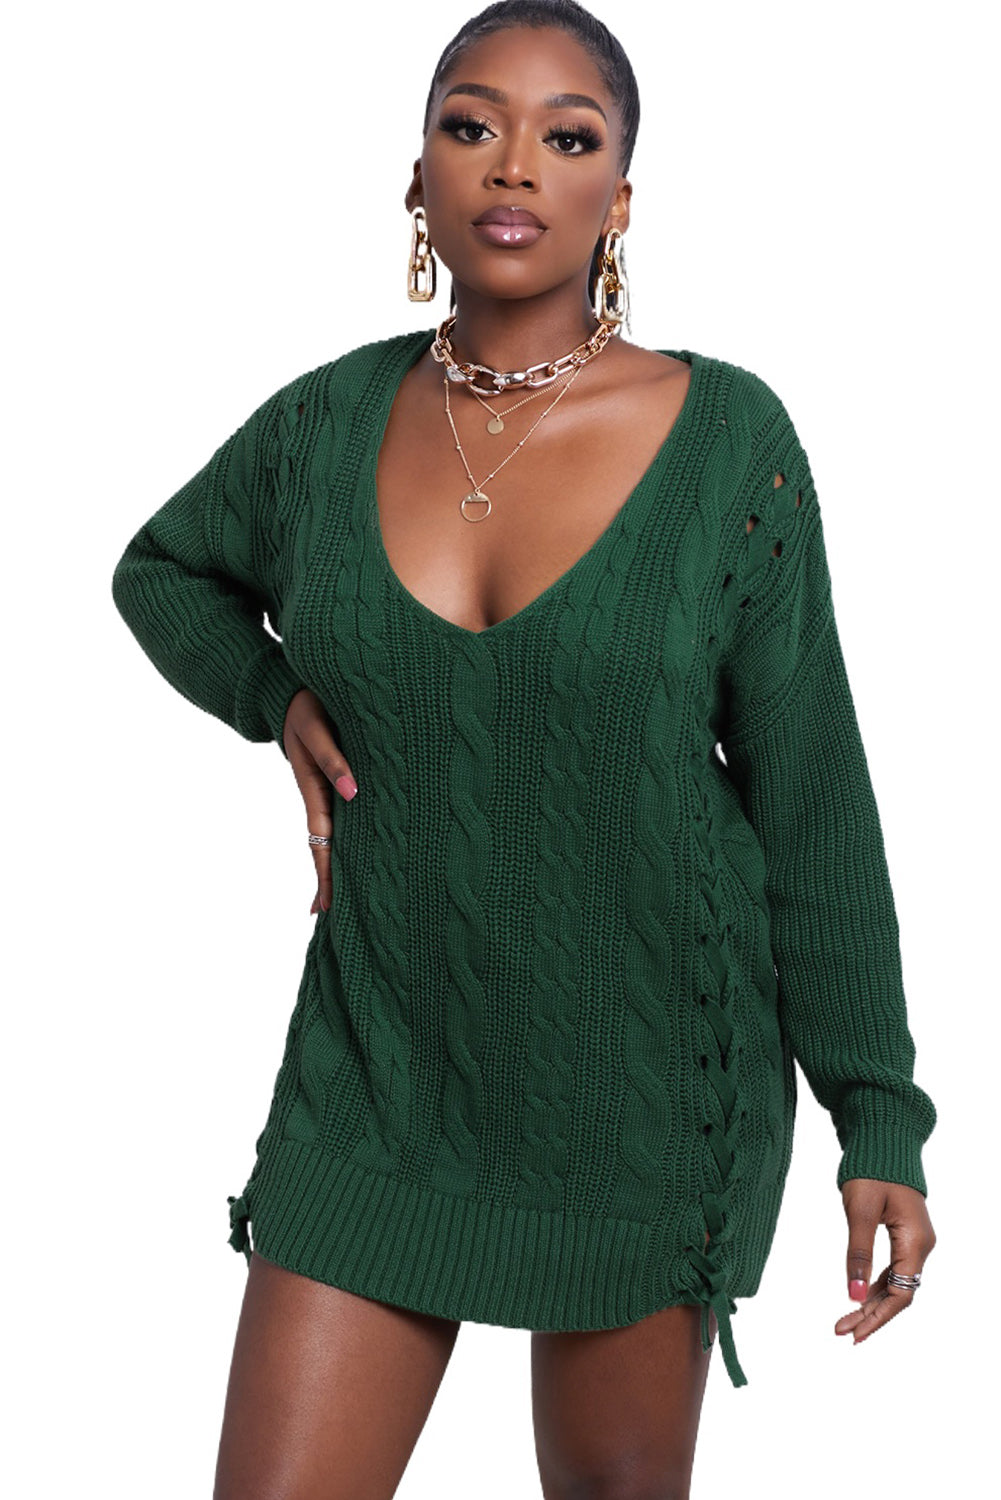 Green Women's Winter Casual Long Sleeve Solid Color Tie bow V Neck Cable Knit Sweater Drop Shoulder Tops LC27994-9